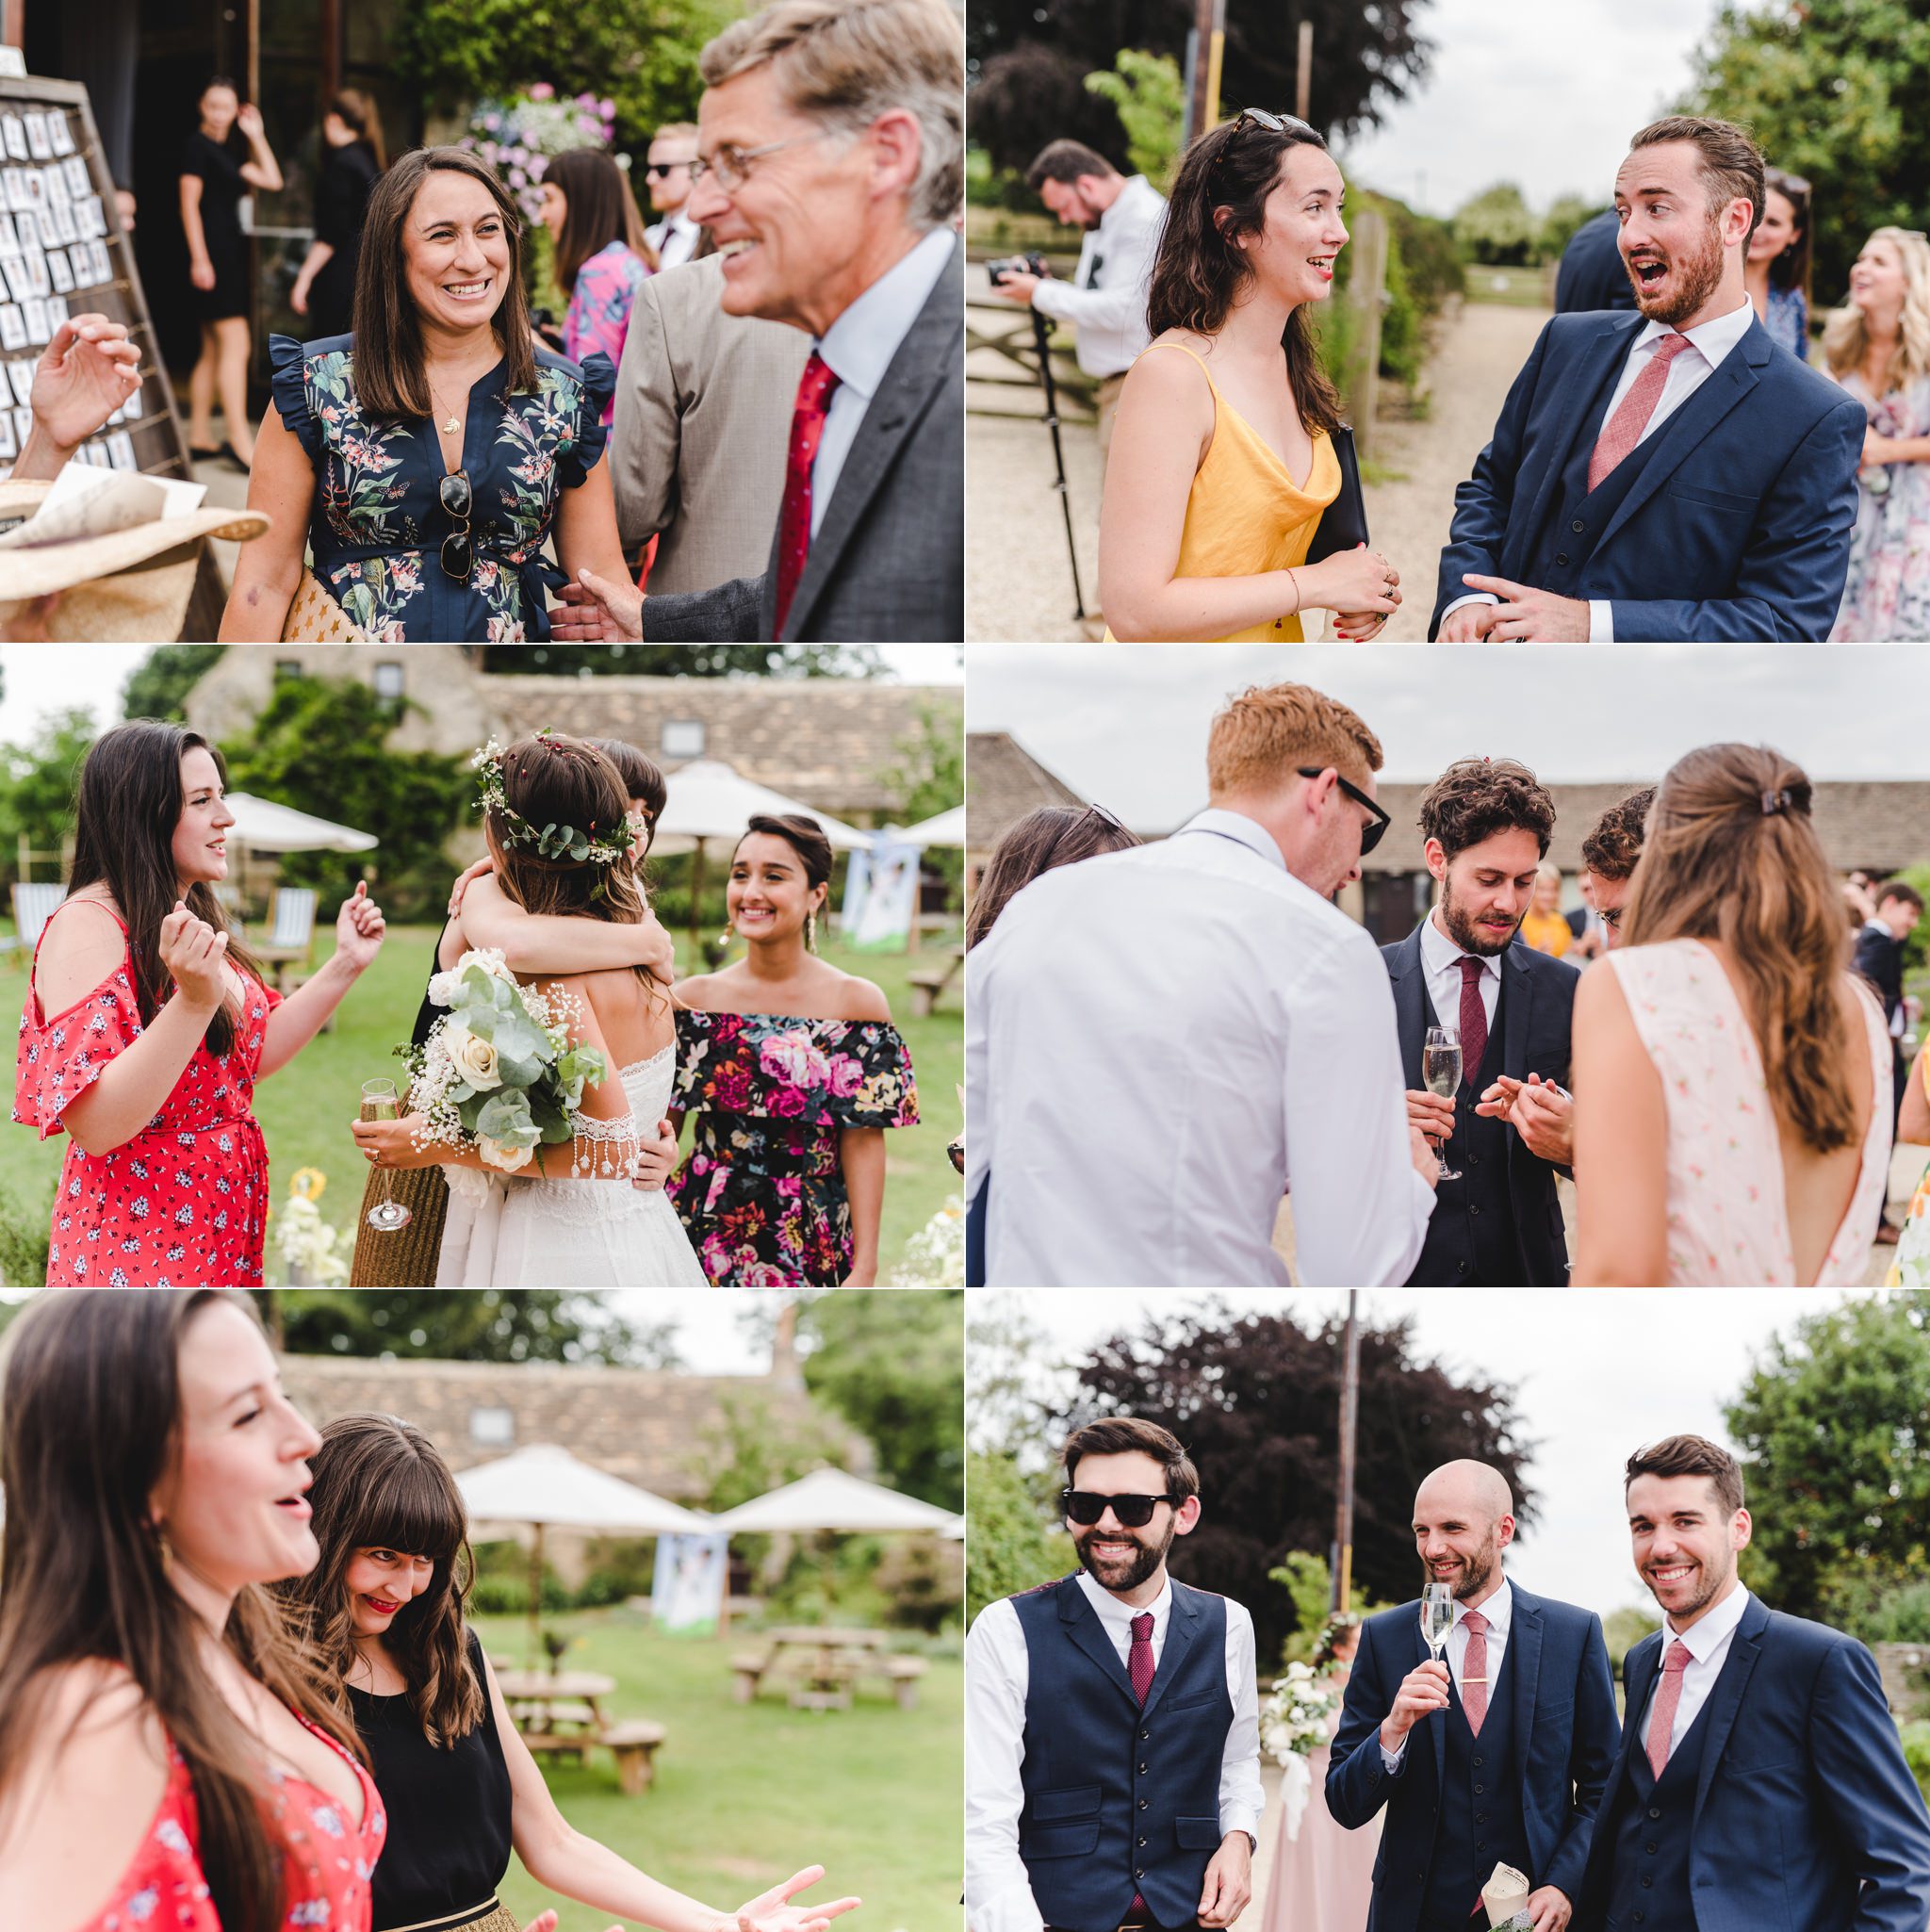 Candid photography of the wedding guests at rosie and harry's wedding